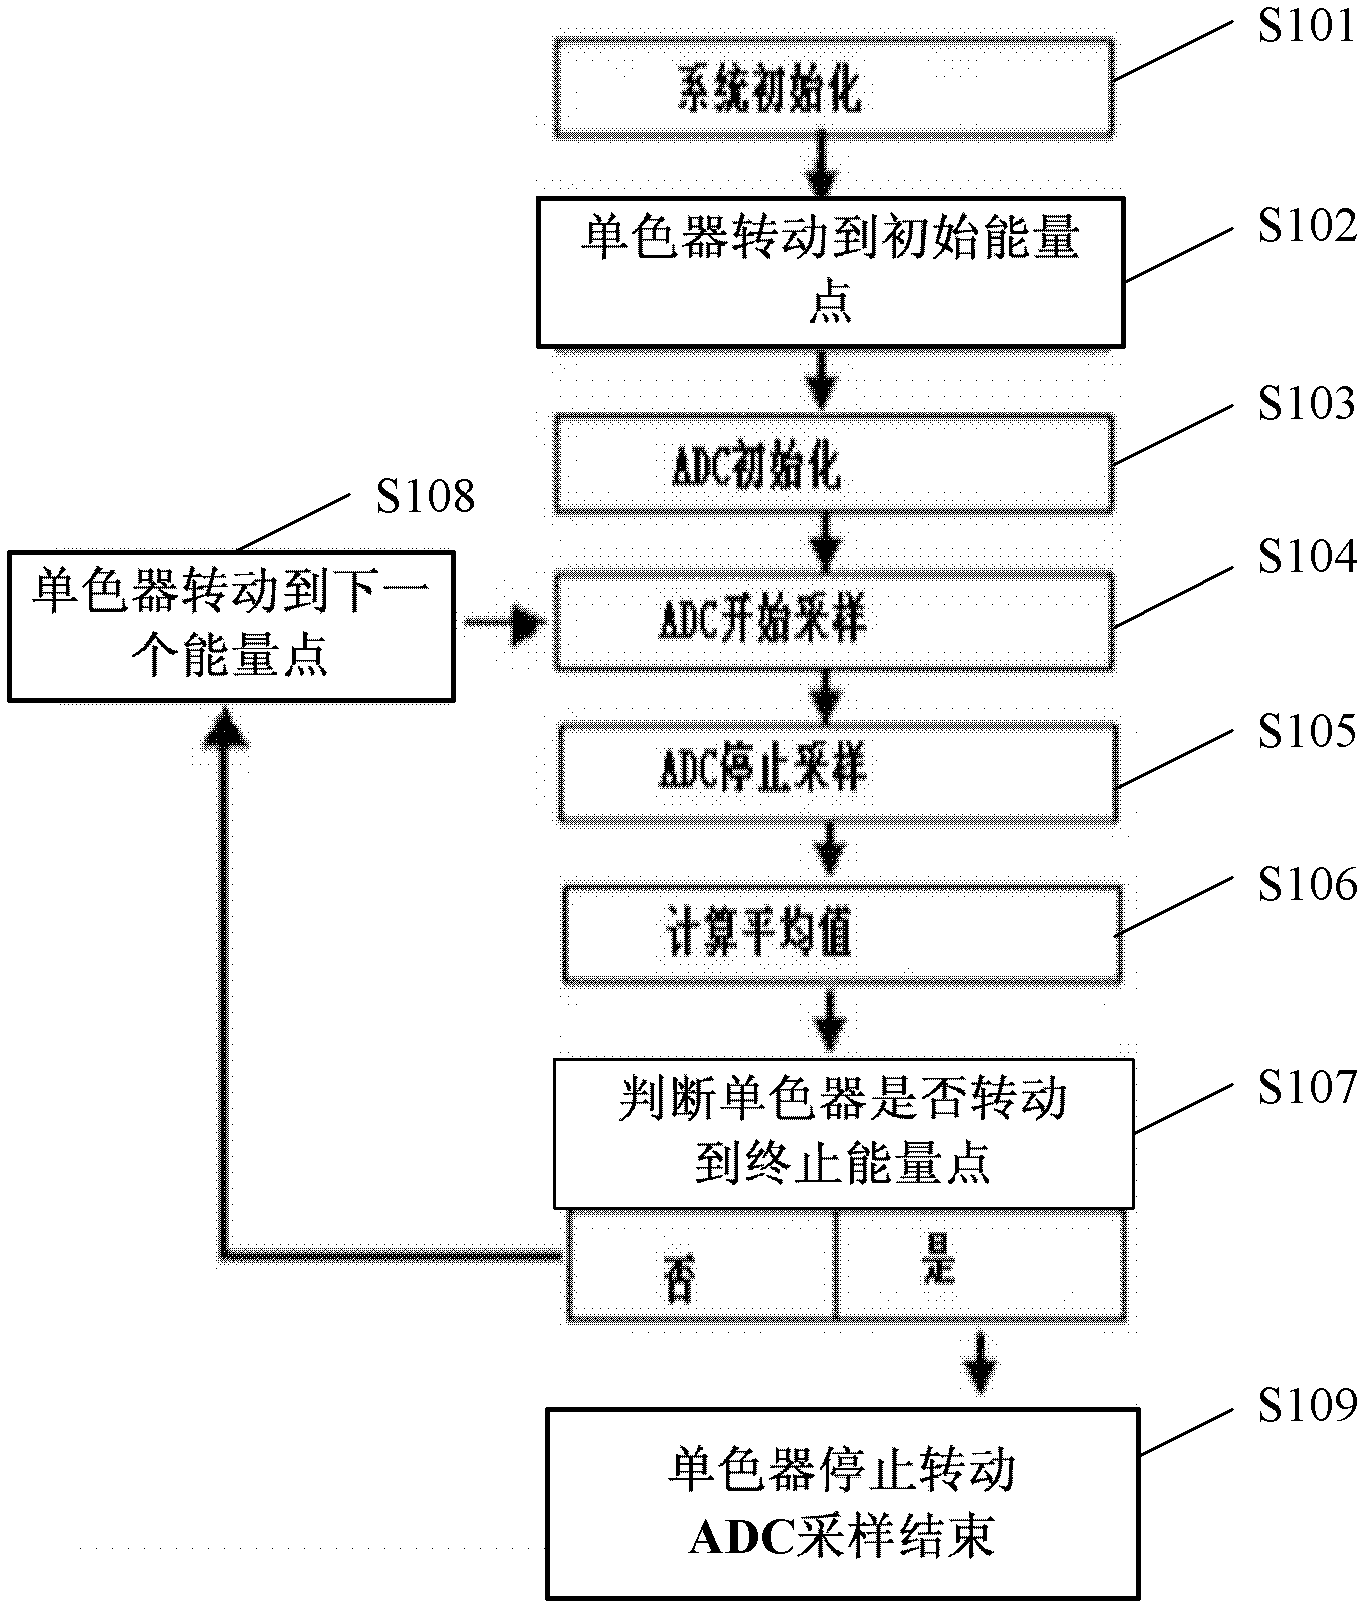 Data collection method based on monochromator quick-scanning control system